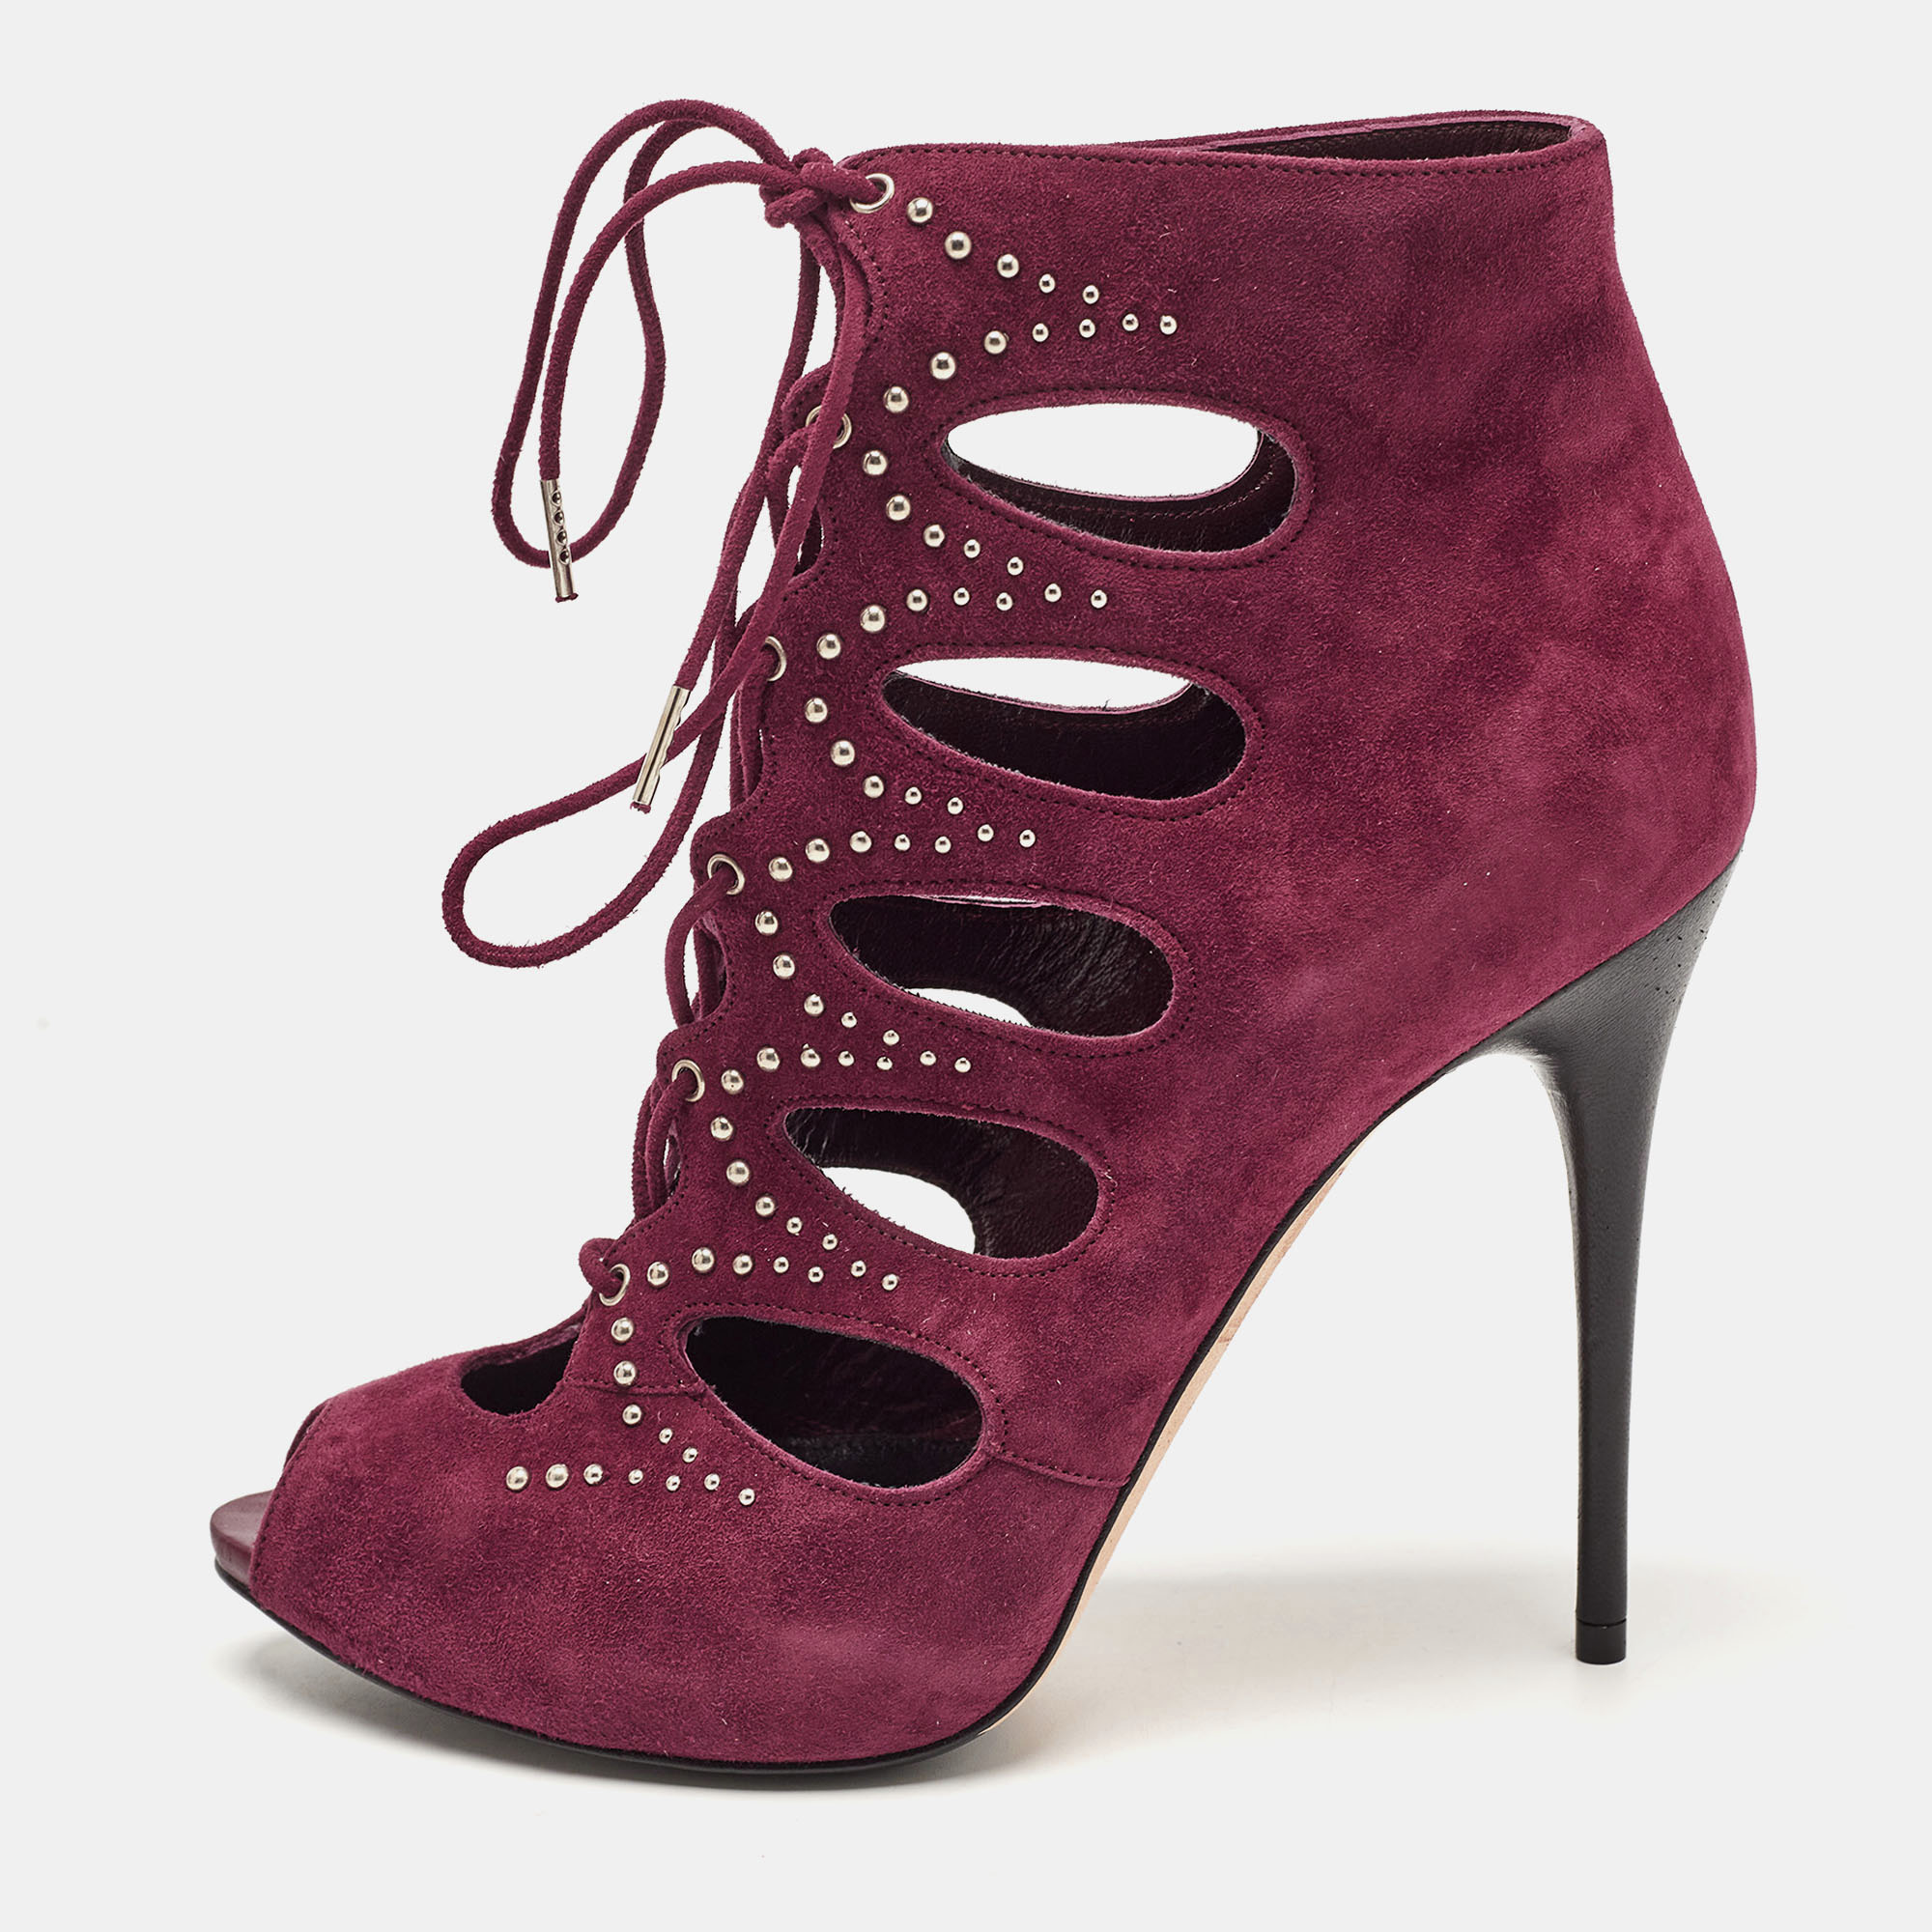 Alexander McQueen Burgundy Suede Cut Out Embellished Lace Up Sandals Size 37.5